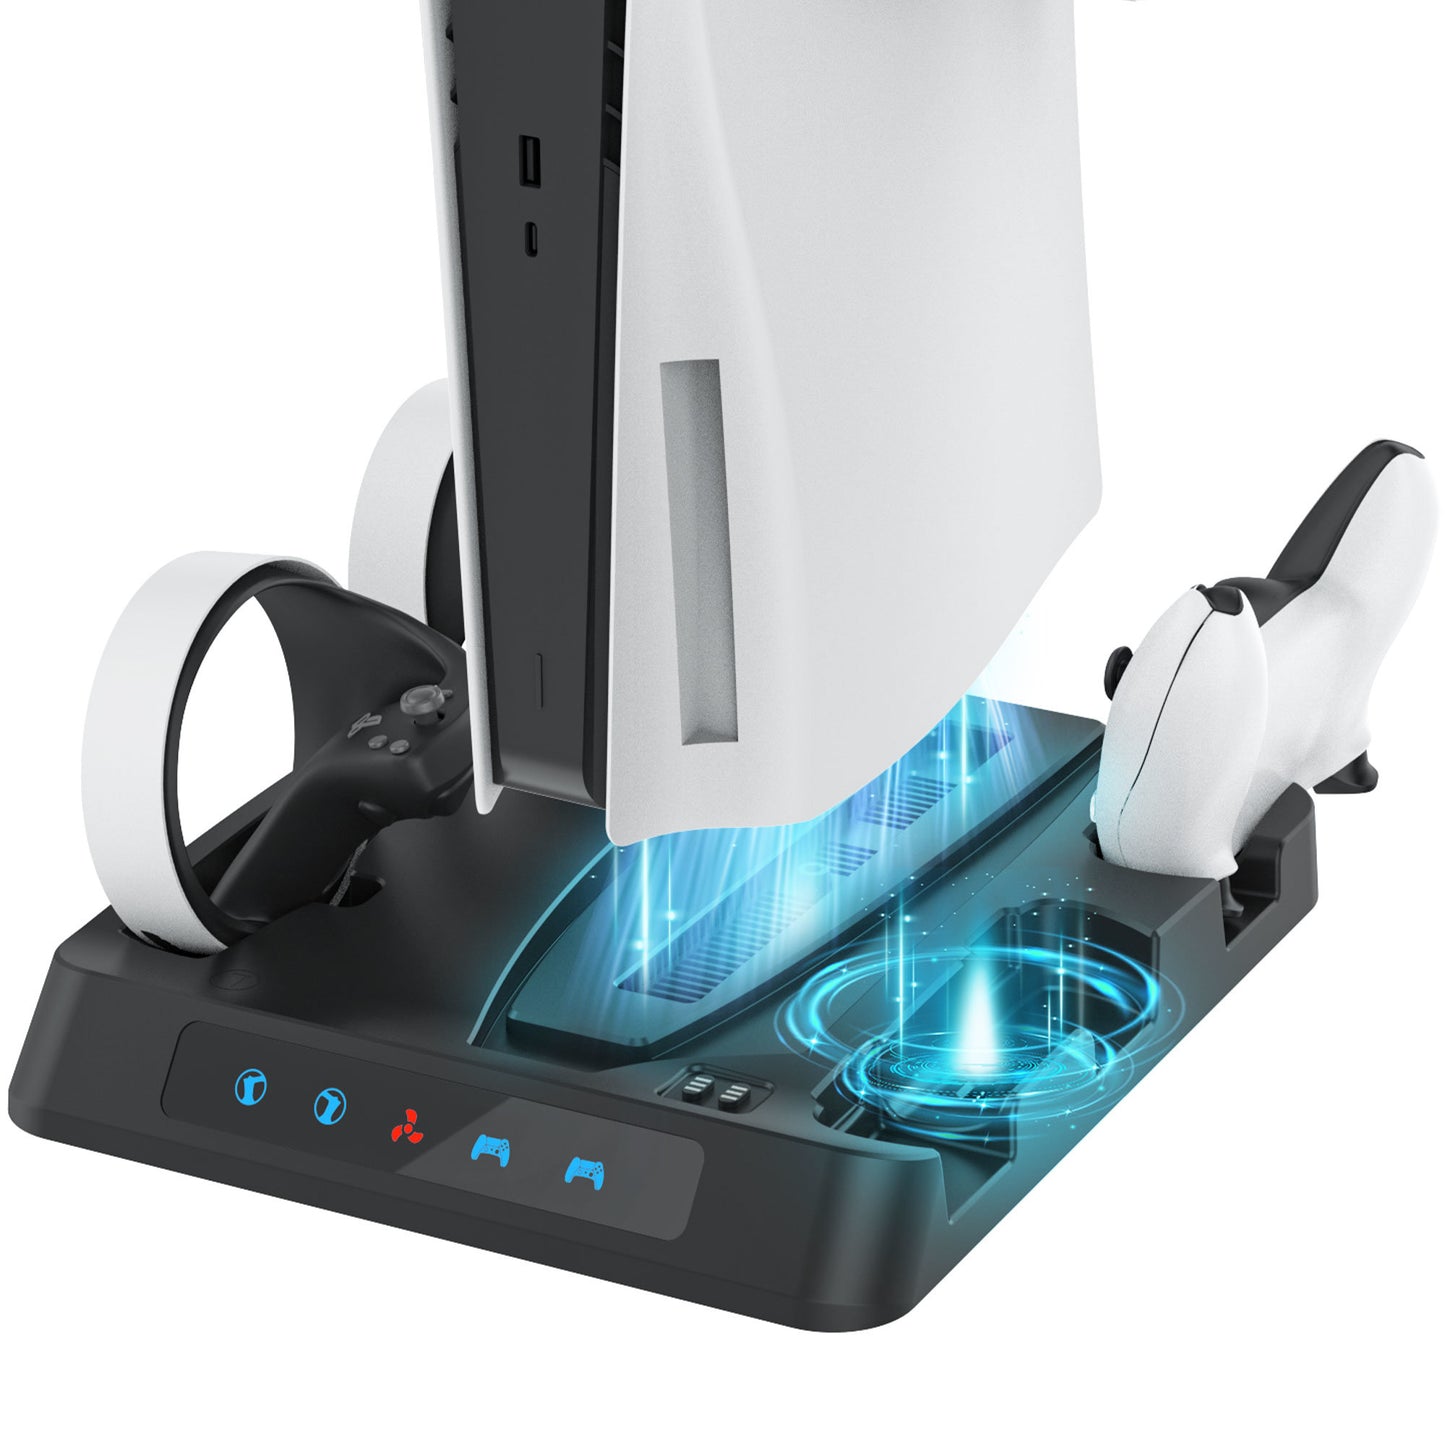 Upgraded PSVR2 Controller Charging Dock,PS5 Controller Charger, Cooling Station with 3-Level Speeds Silent Fan,VR and PS5 Stand Horizontal Display Your PSVR2 and PS5 Accessories